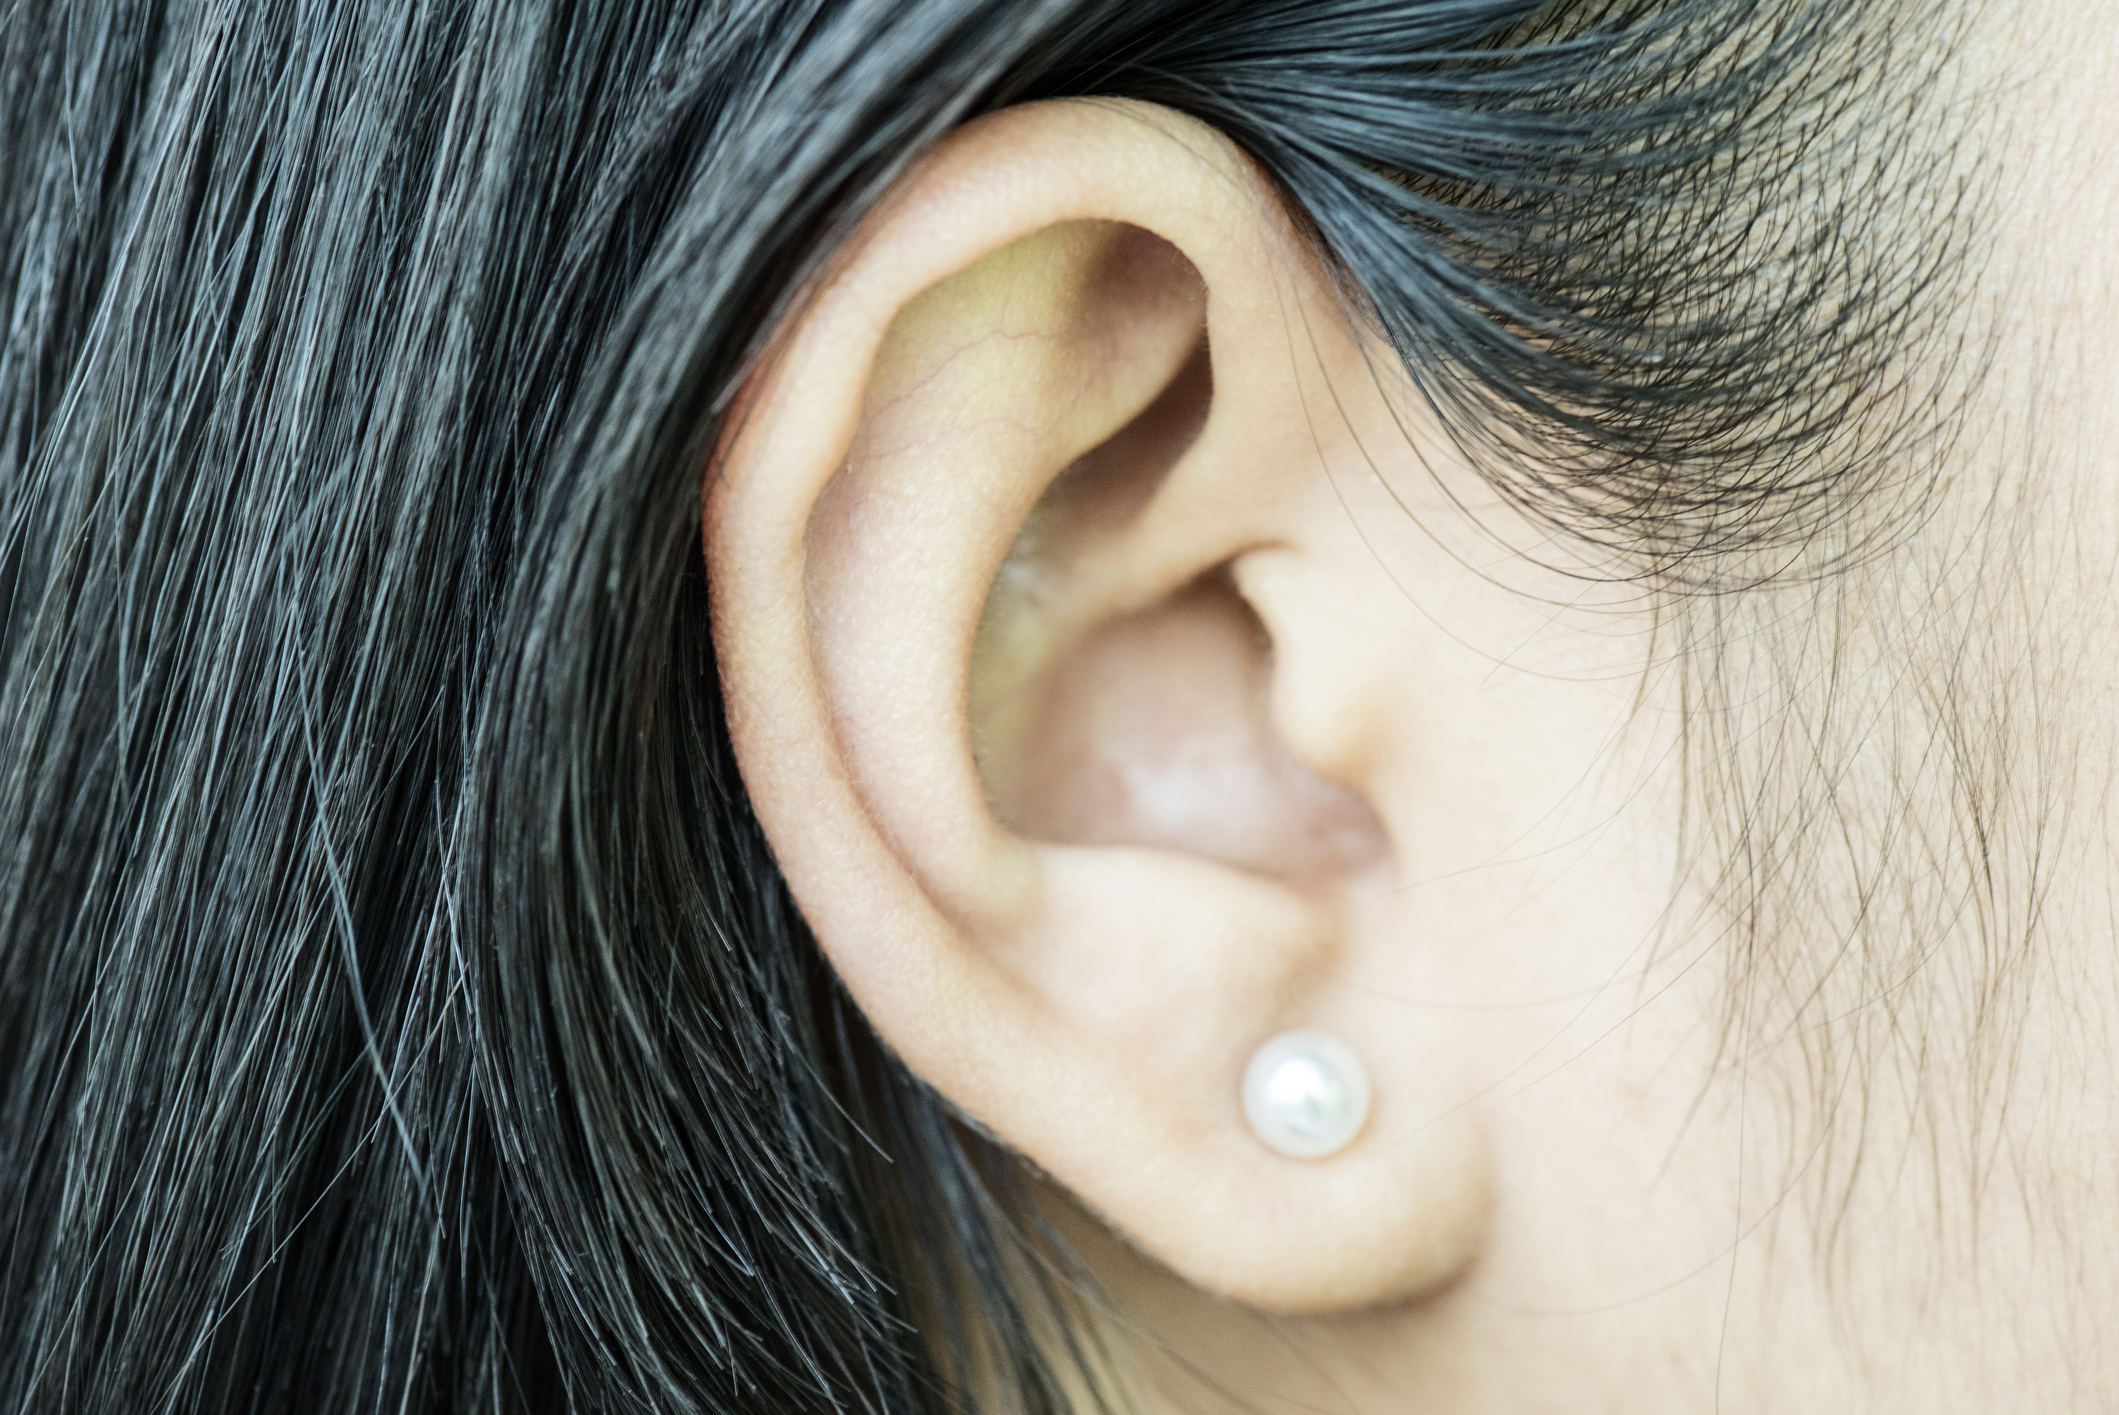 An ear with a pearl earring